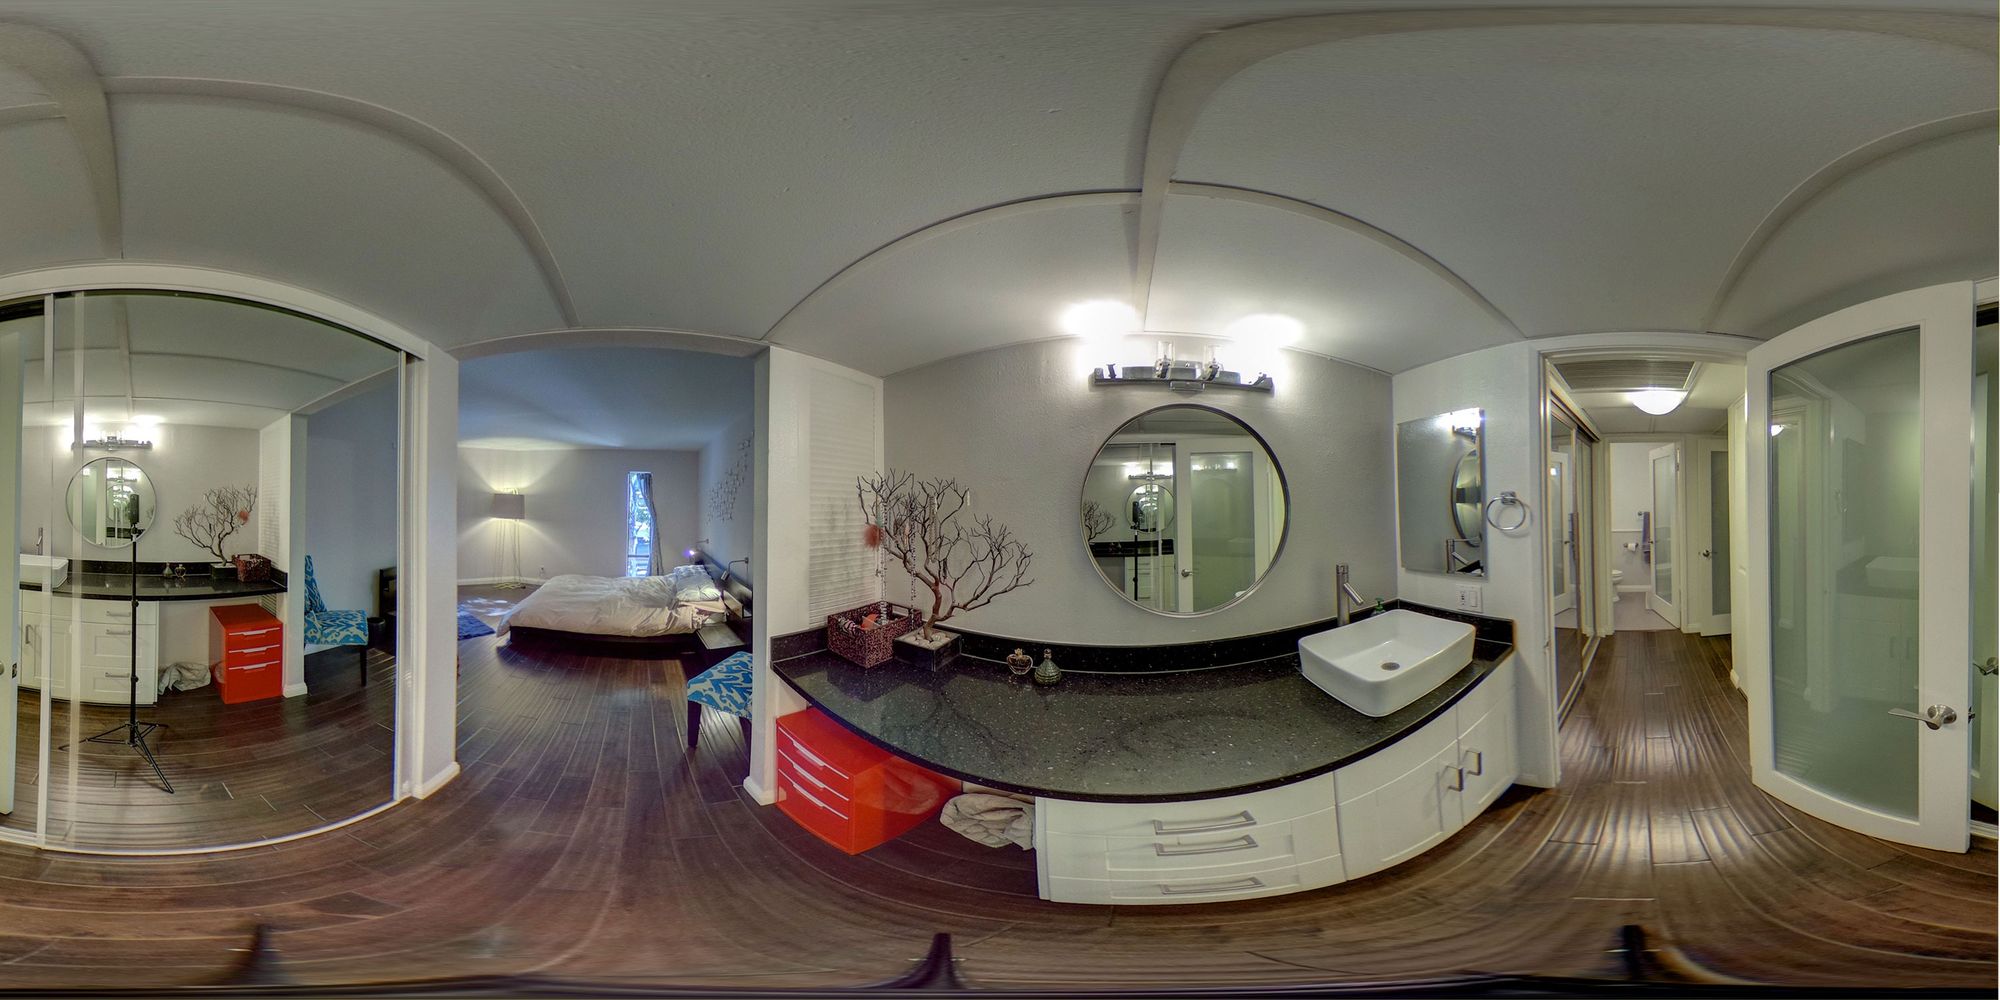 OHVR: Our MVP of virtual reality for real estate is ready for testing